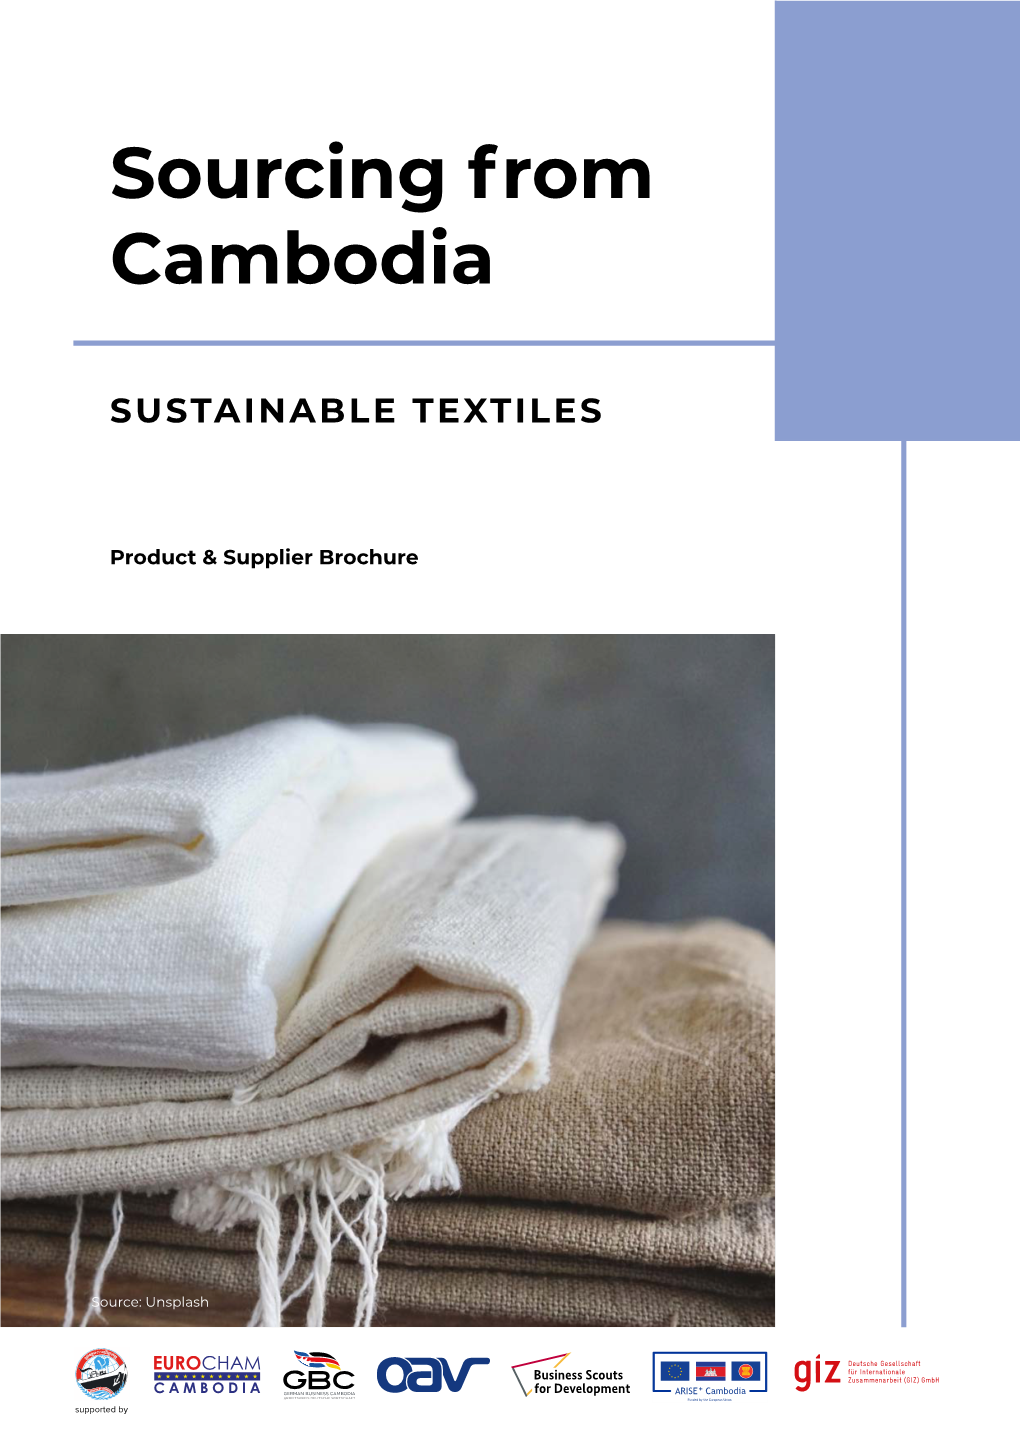 Sourcing from Cambodia